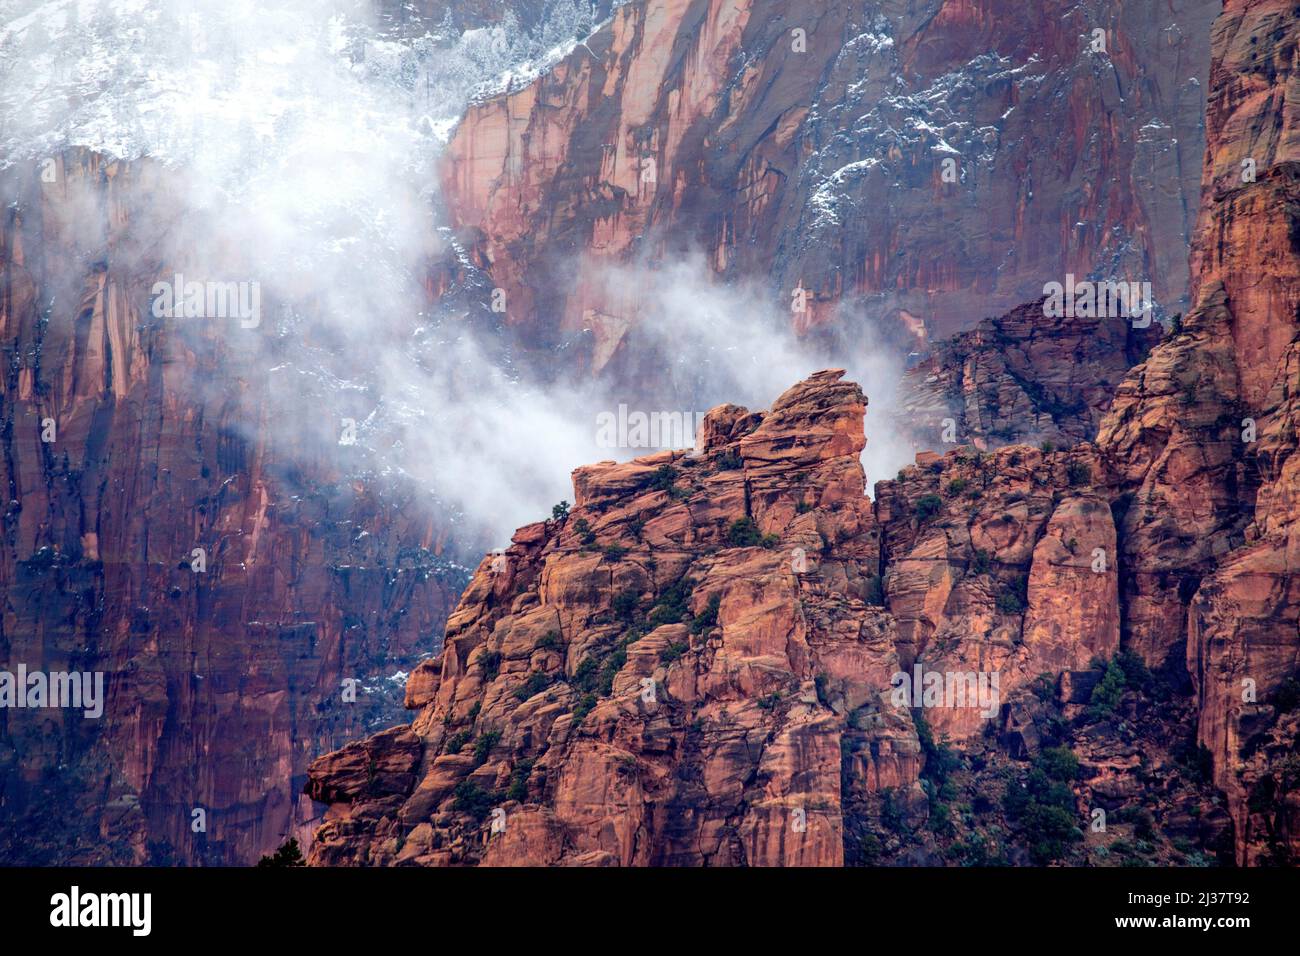 Rain clouds and fog have enveloped Zion Canyon at Zion Canyon National Park, Utah. Stock Photo